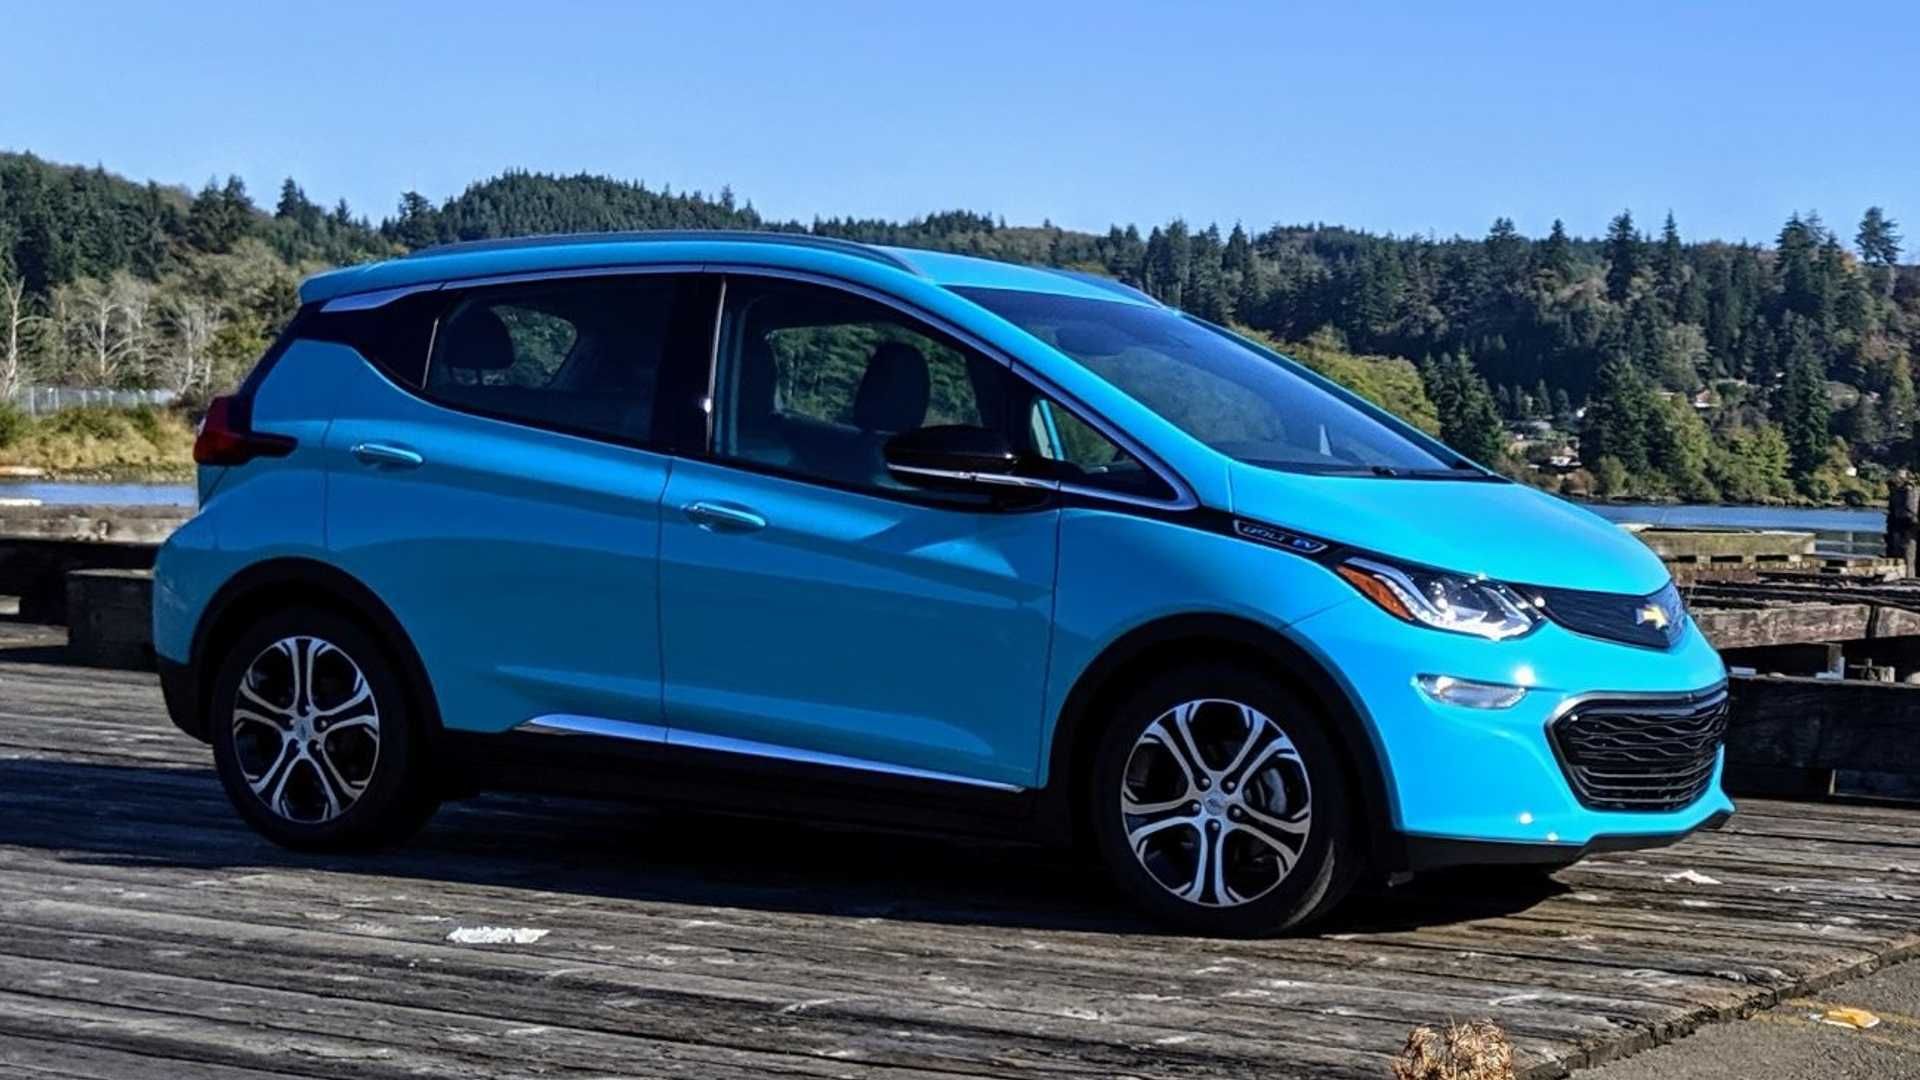 Increased Range On The Electric Chevy Bolt